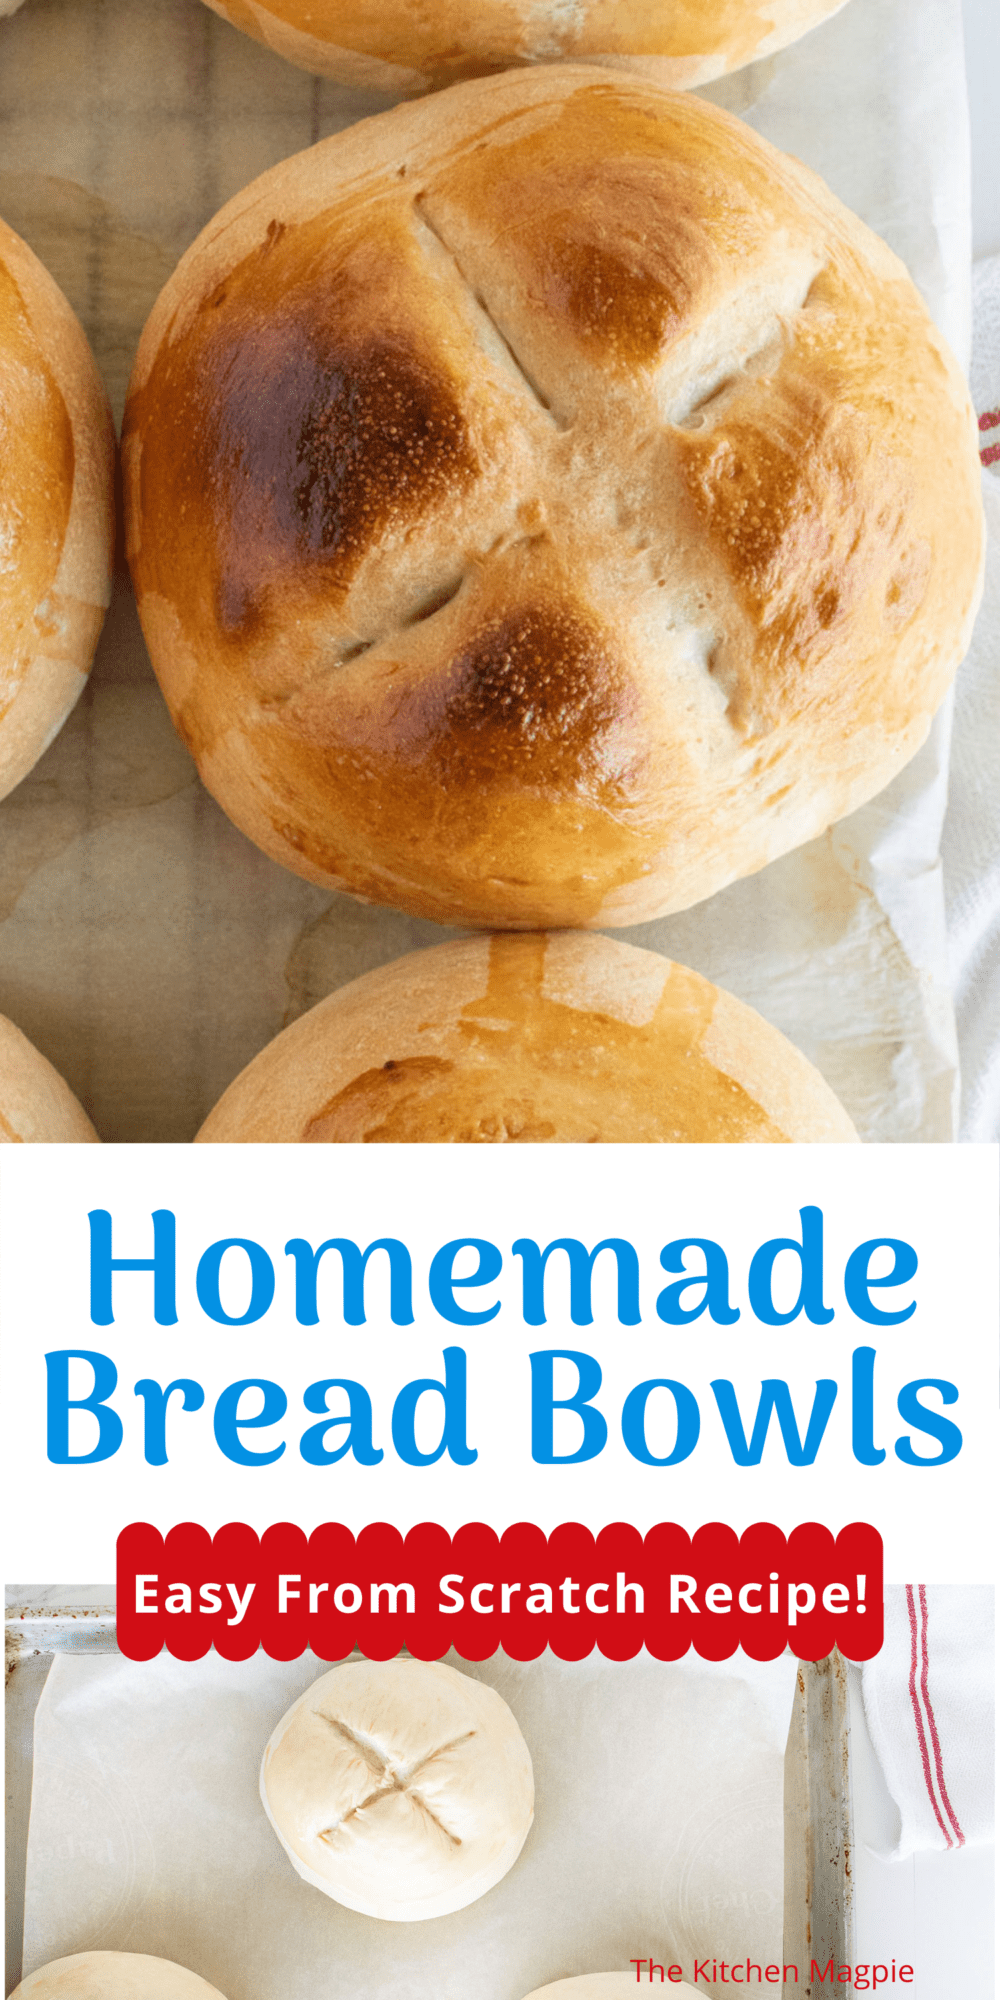 How to make bread bowls that are perfect to serve soups and dips in! An easy from scratch recipe that works every time!